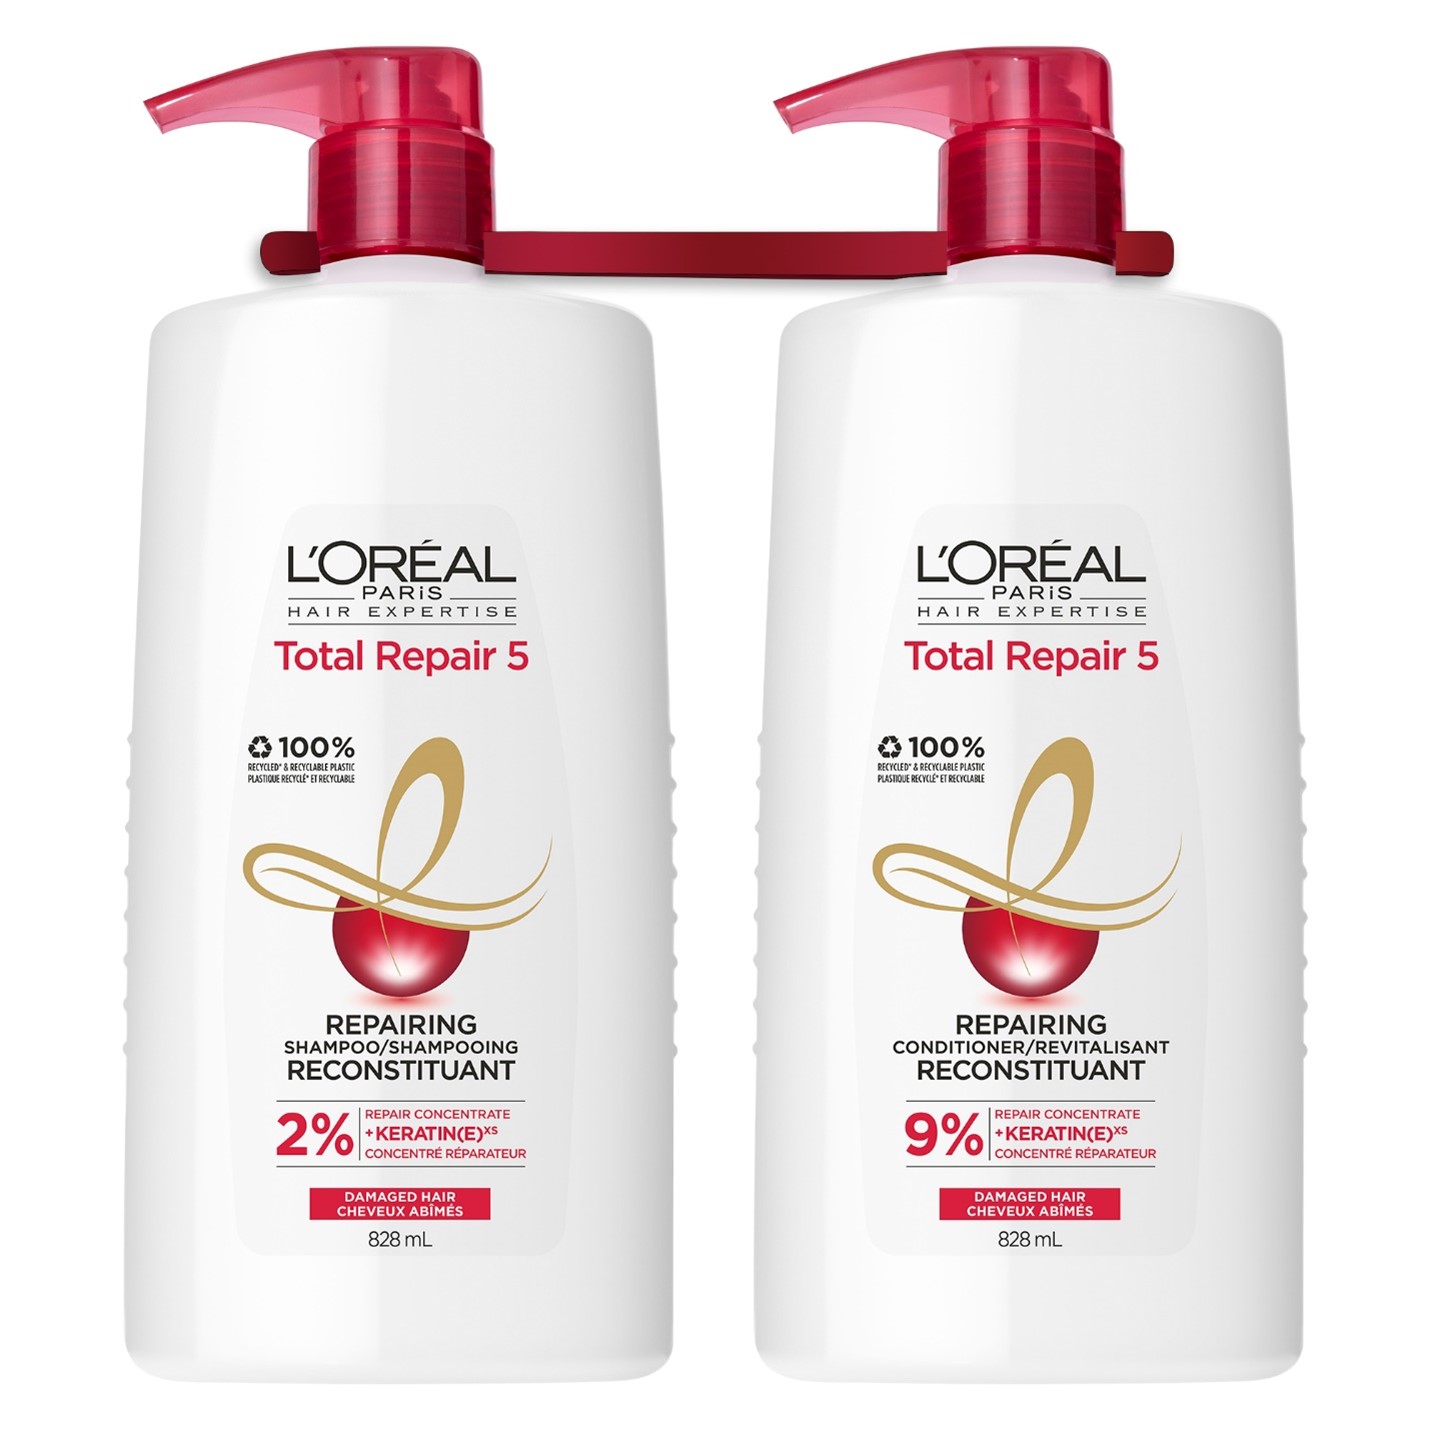 L'Oreal Paris Hair Experts Total Repair 5 Shampoo & Conditioner review &  CONTEST!!! #ad - Costco East Fan Blog